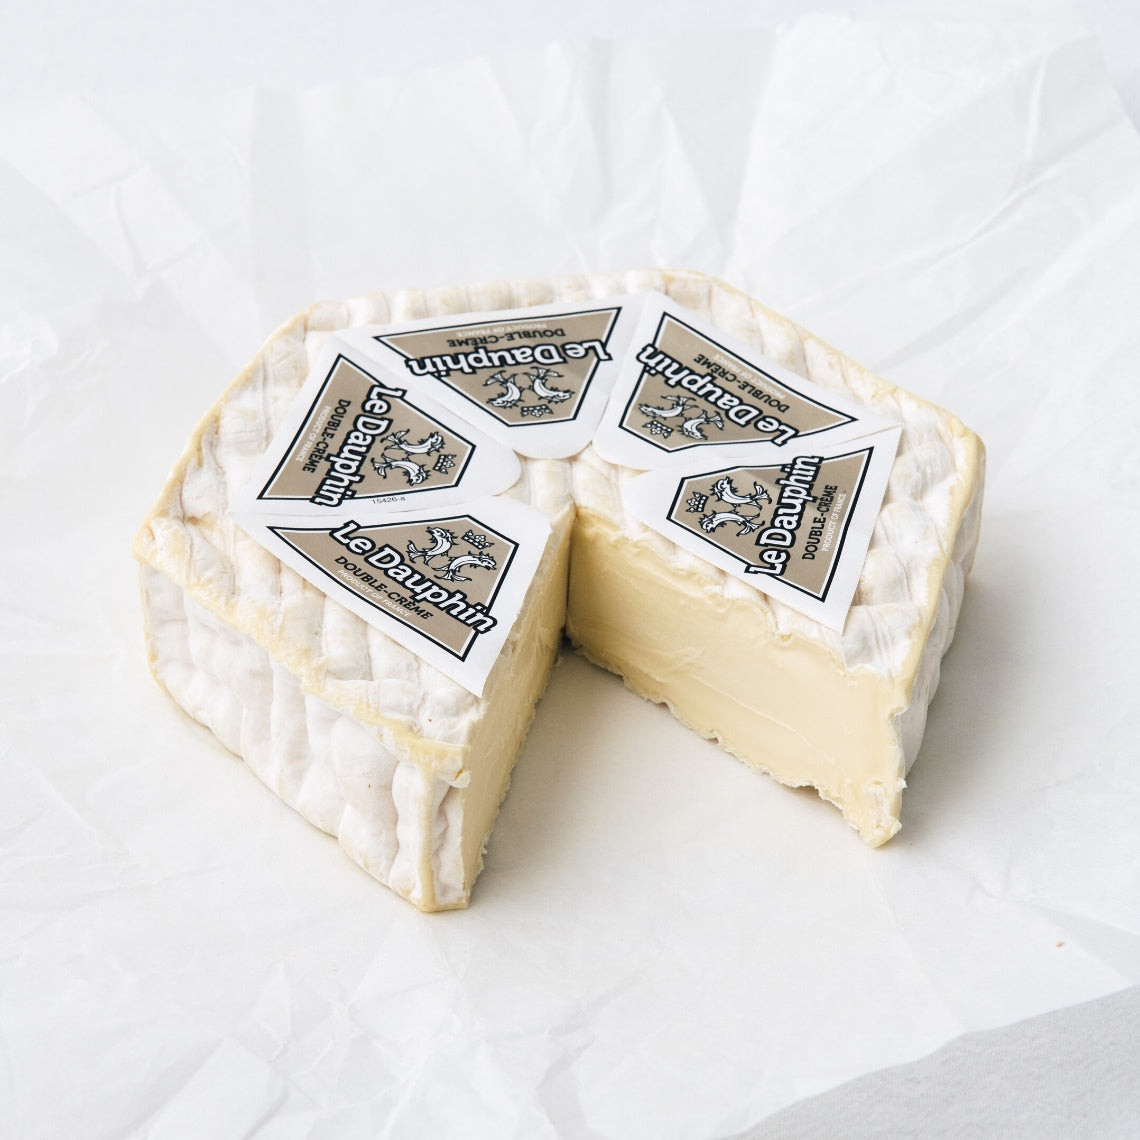 Le Dauphin Double Creme Brie 160g